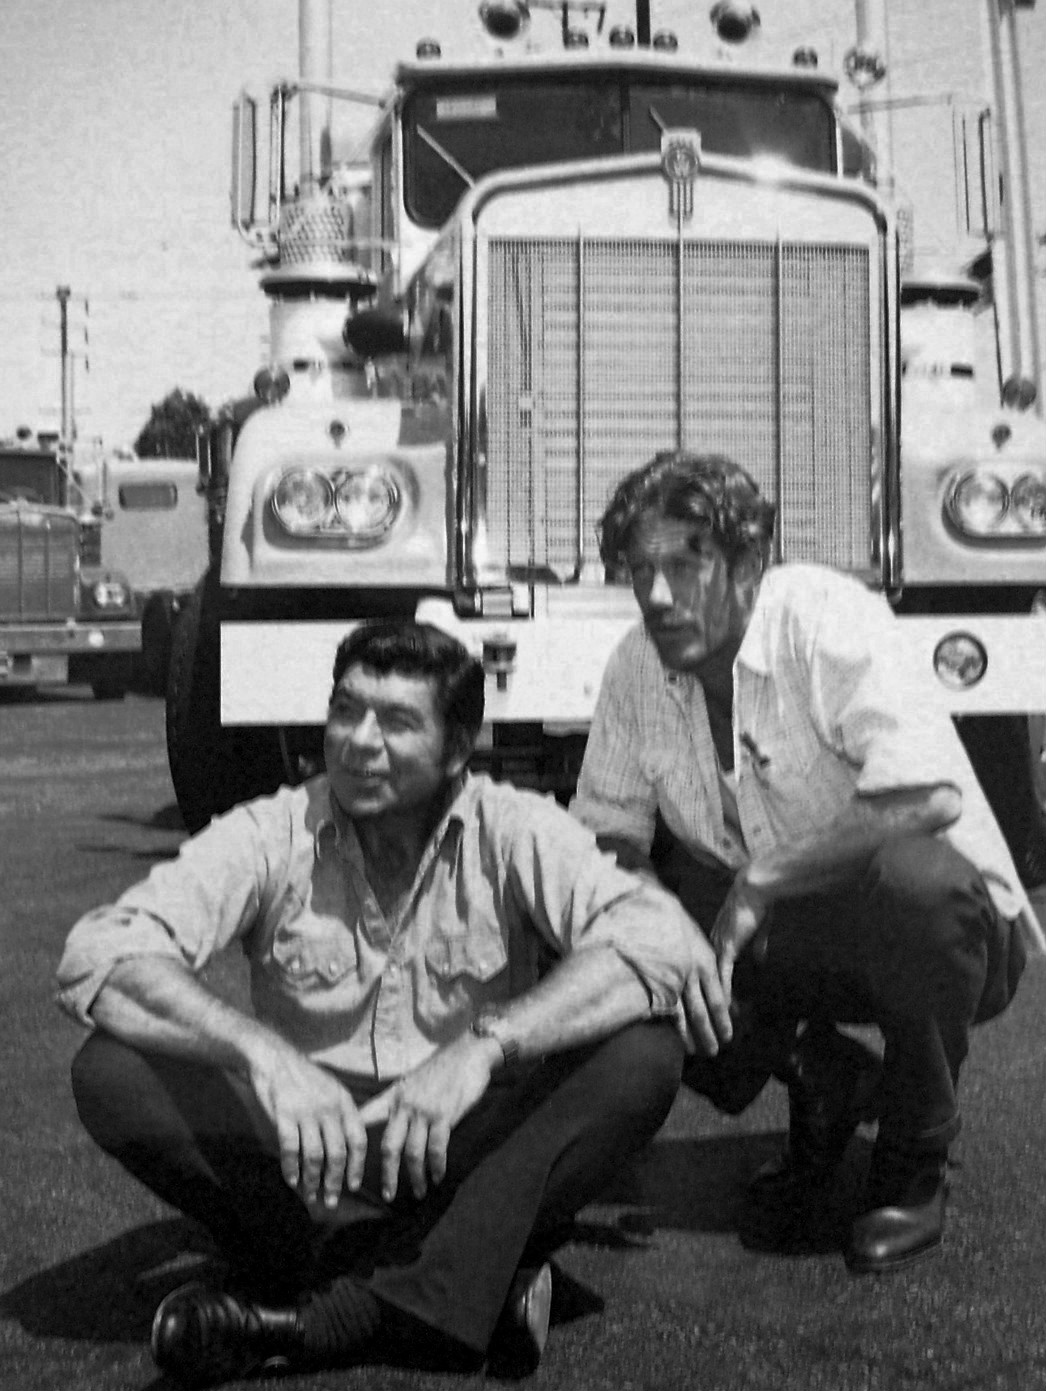 Claude Akins & Frank Converse TV show "Movin On". 1974 ~